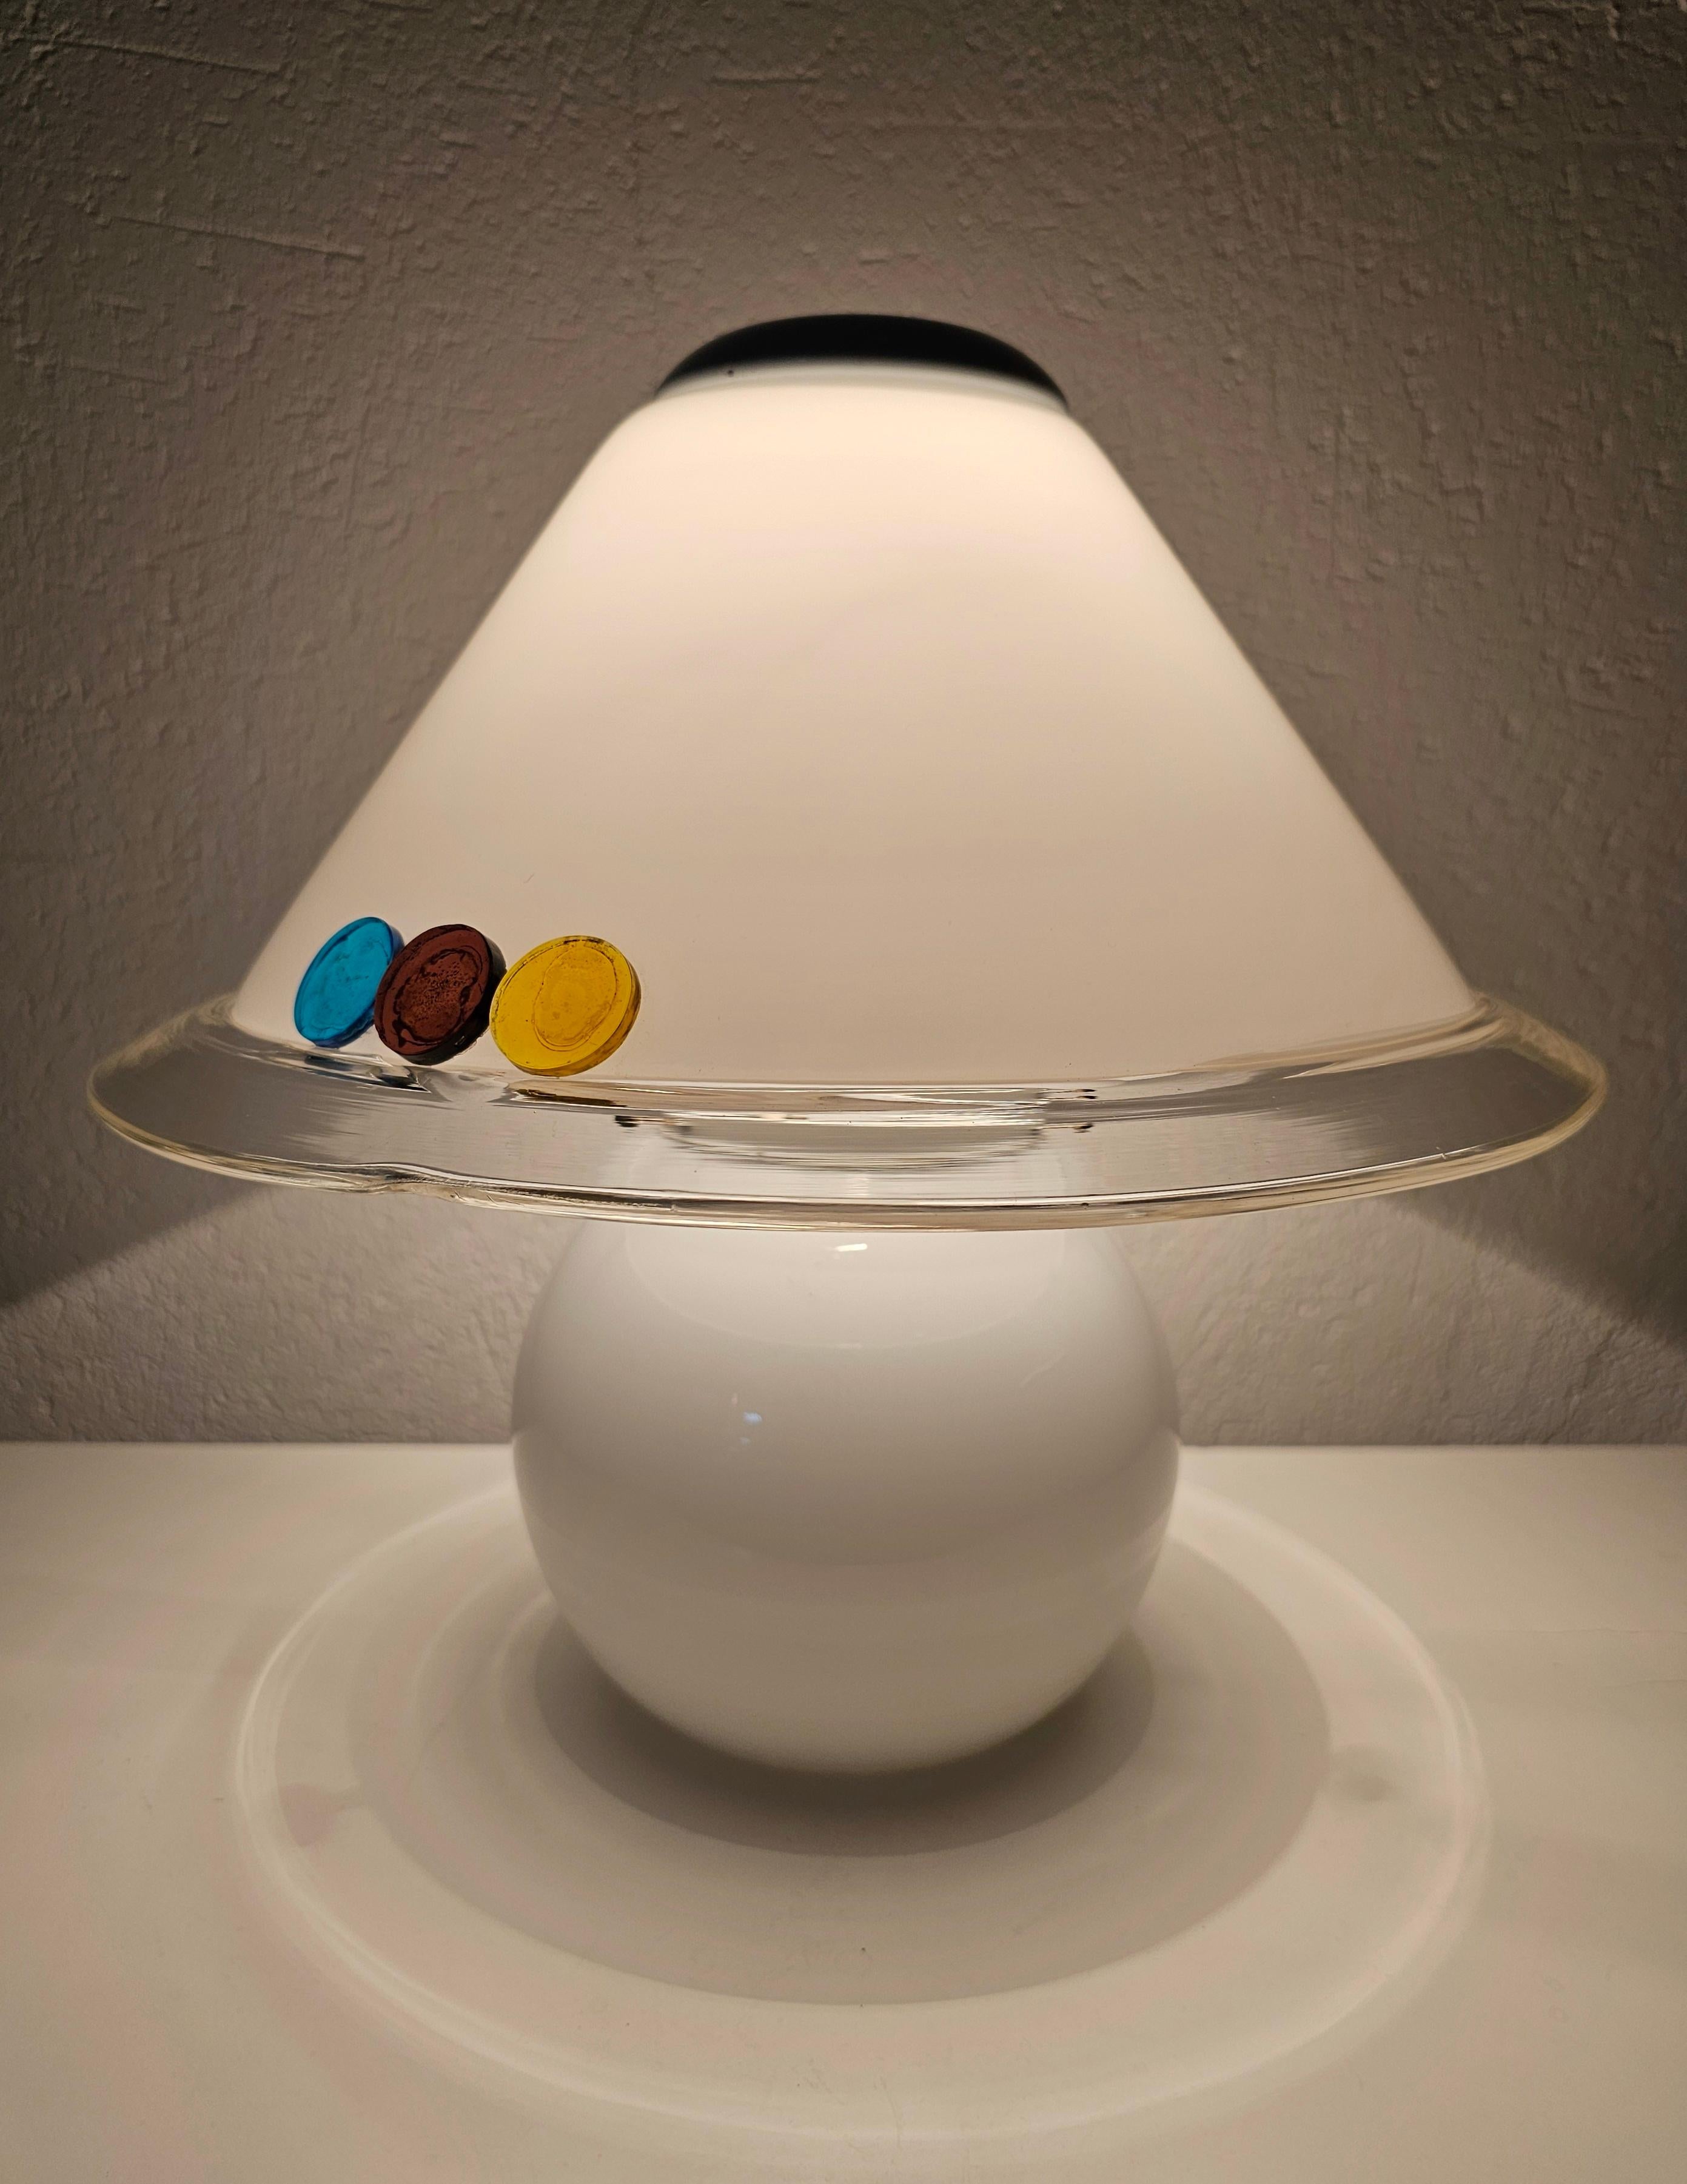 In this listing you will find a gorgeous Mid Century Modern table lamp done in white Murano glass with colorful glass details. It features 2 lights, one inside the base of the lamp and the second underneath the shade, which could be turned on